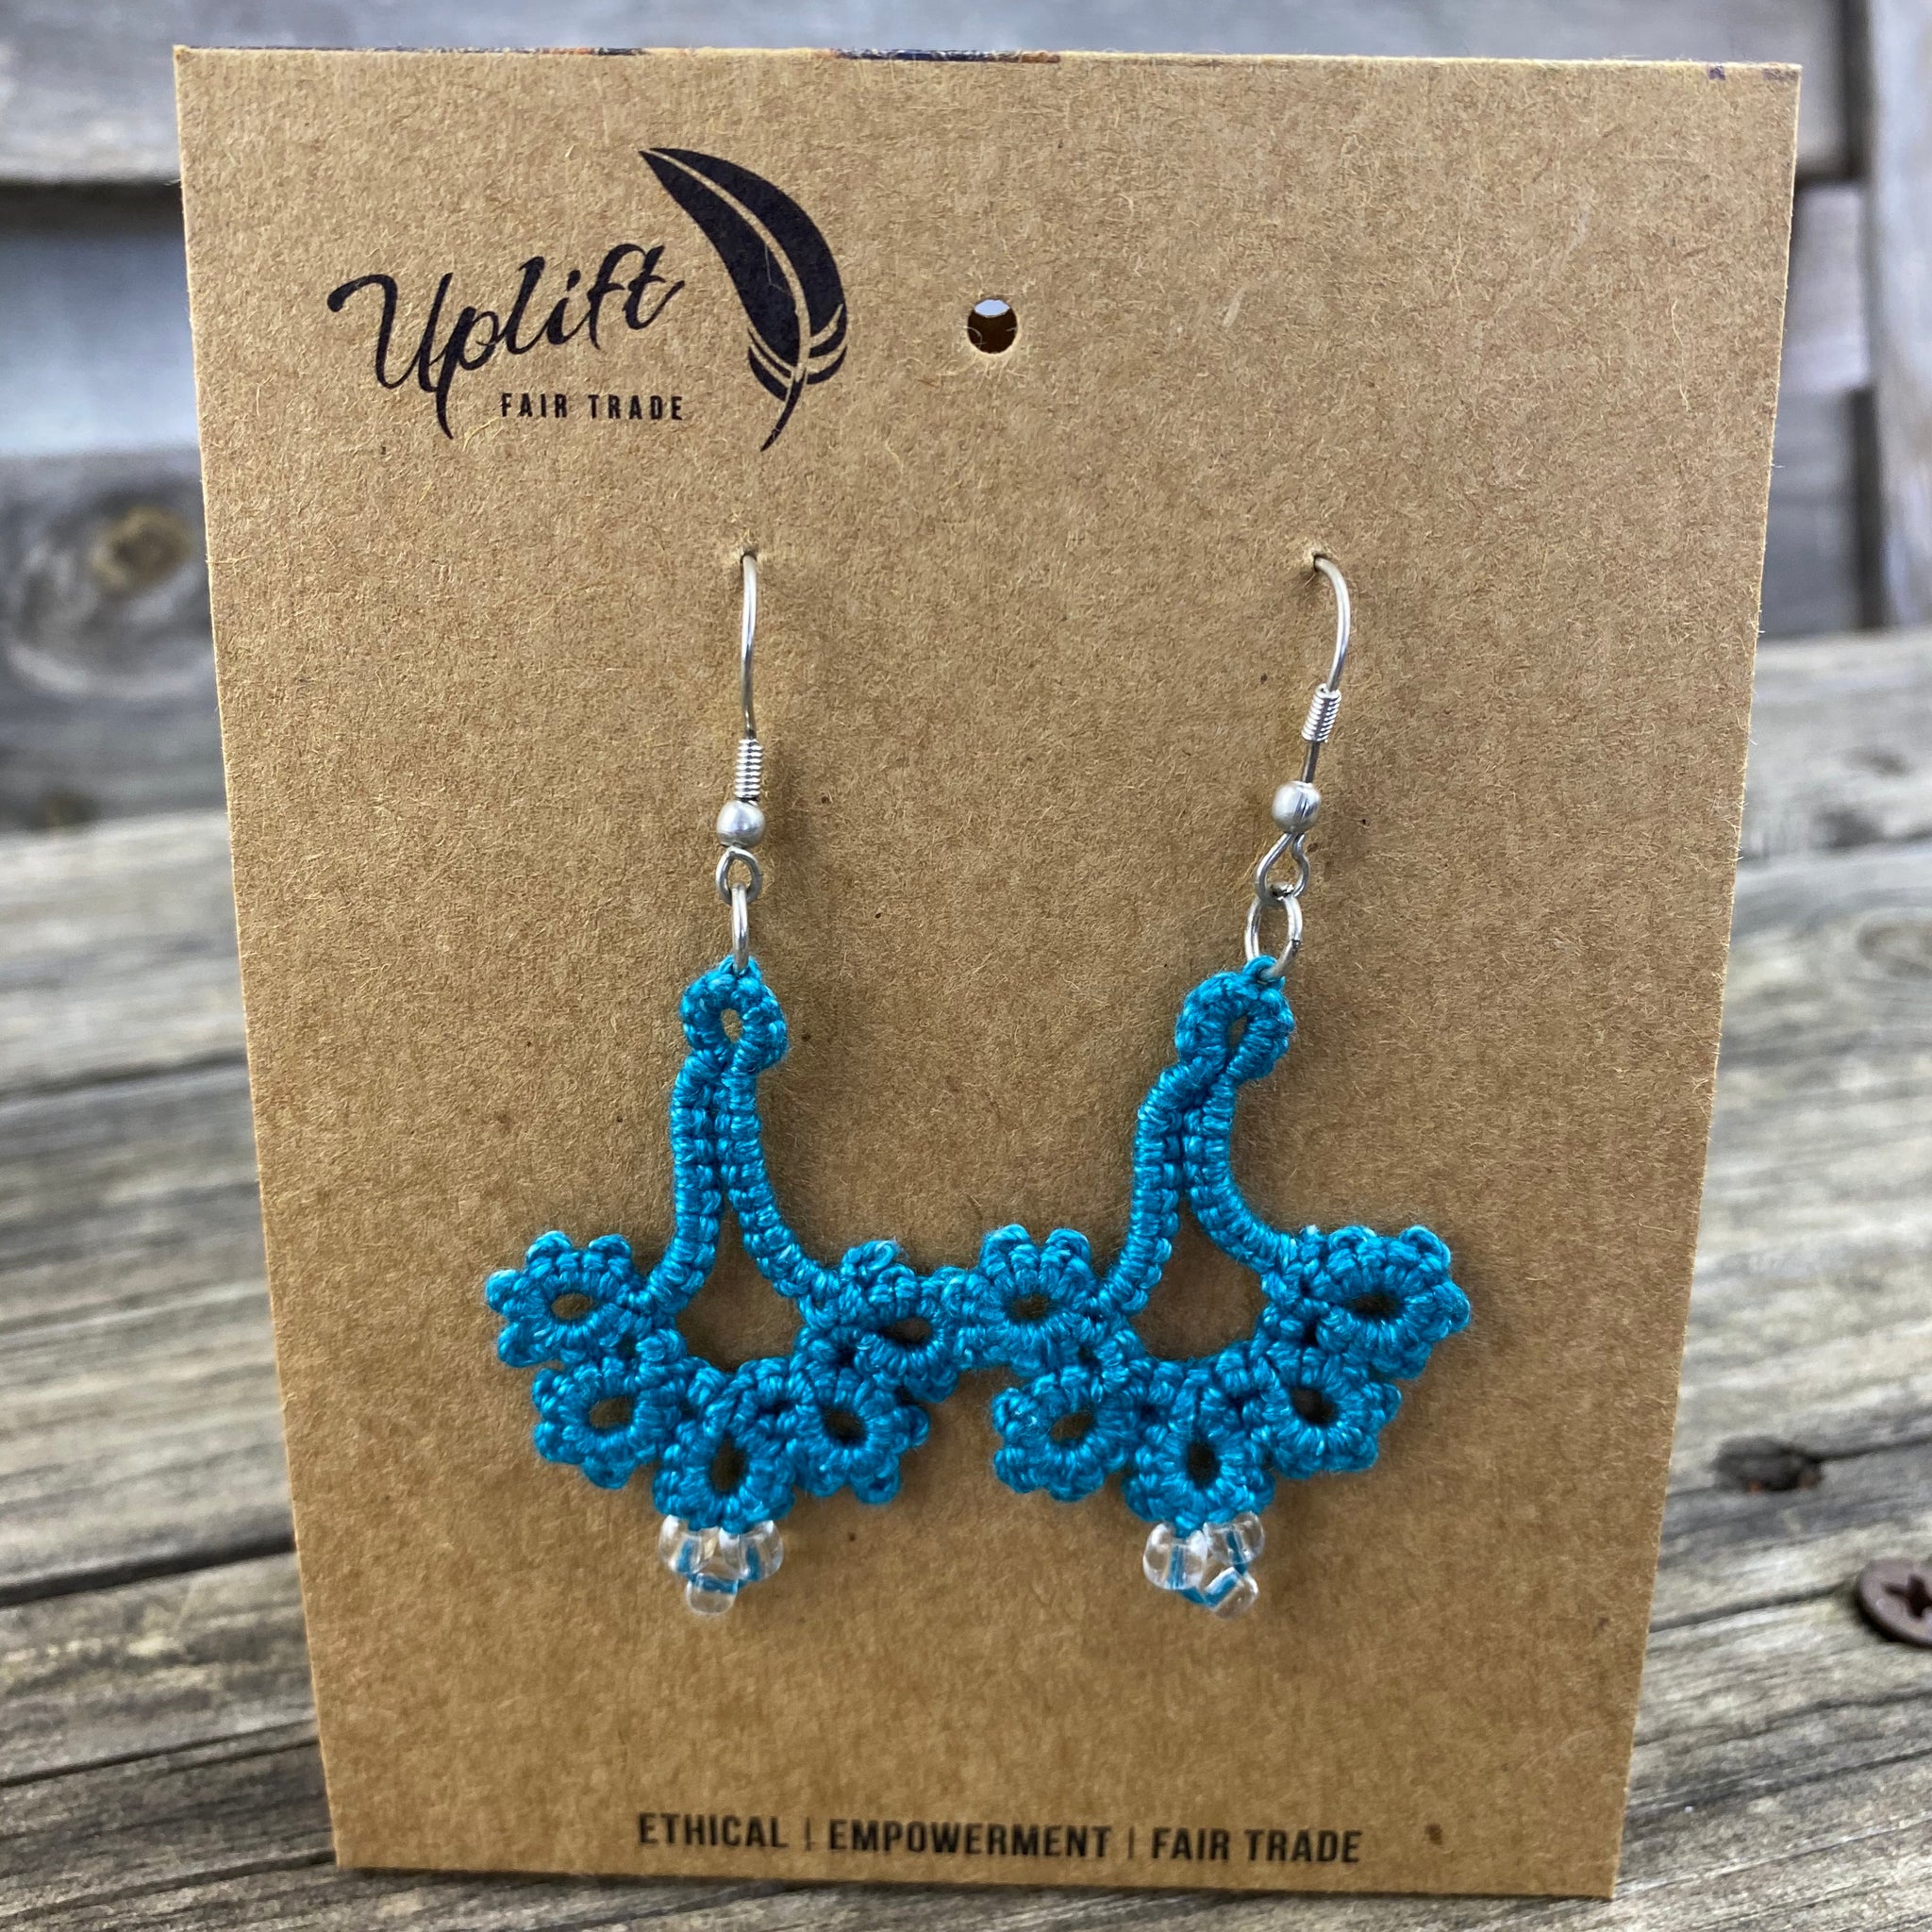 Turquoise fan-shaped tatted earrings with 3 small beads. 